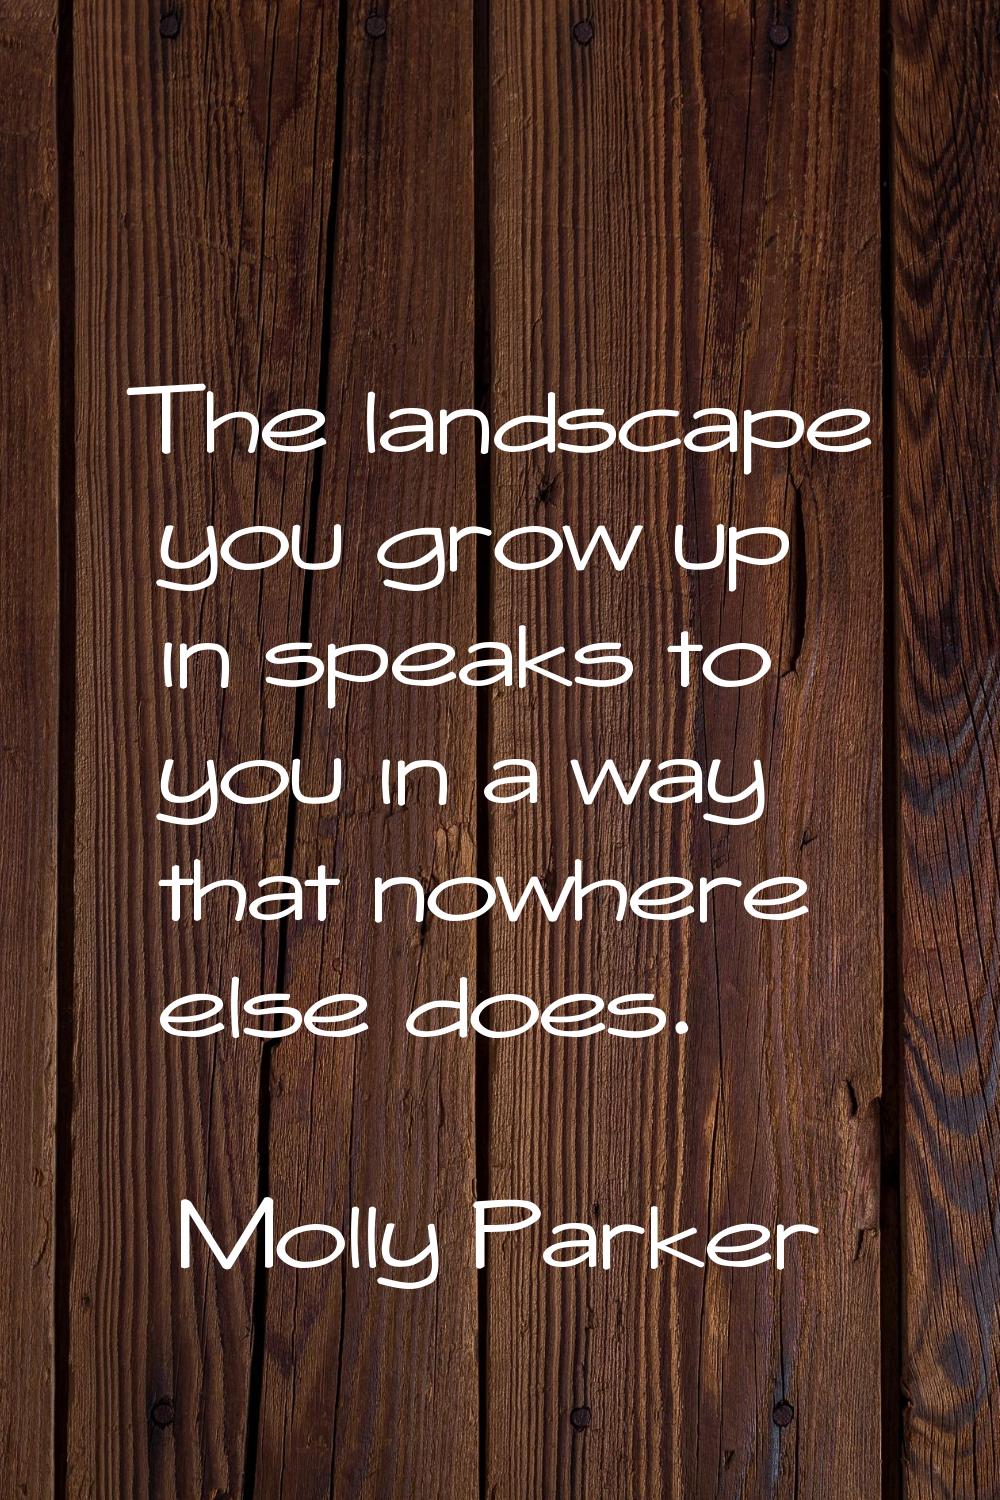 The landscape you grow up in speaks to you in a way that nowhere else does.